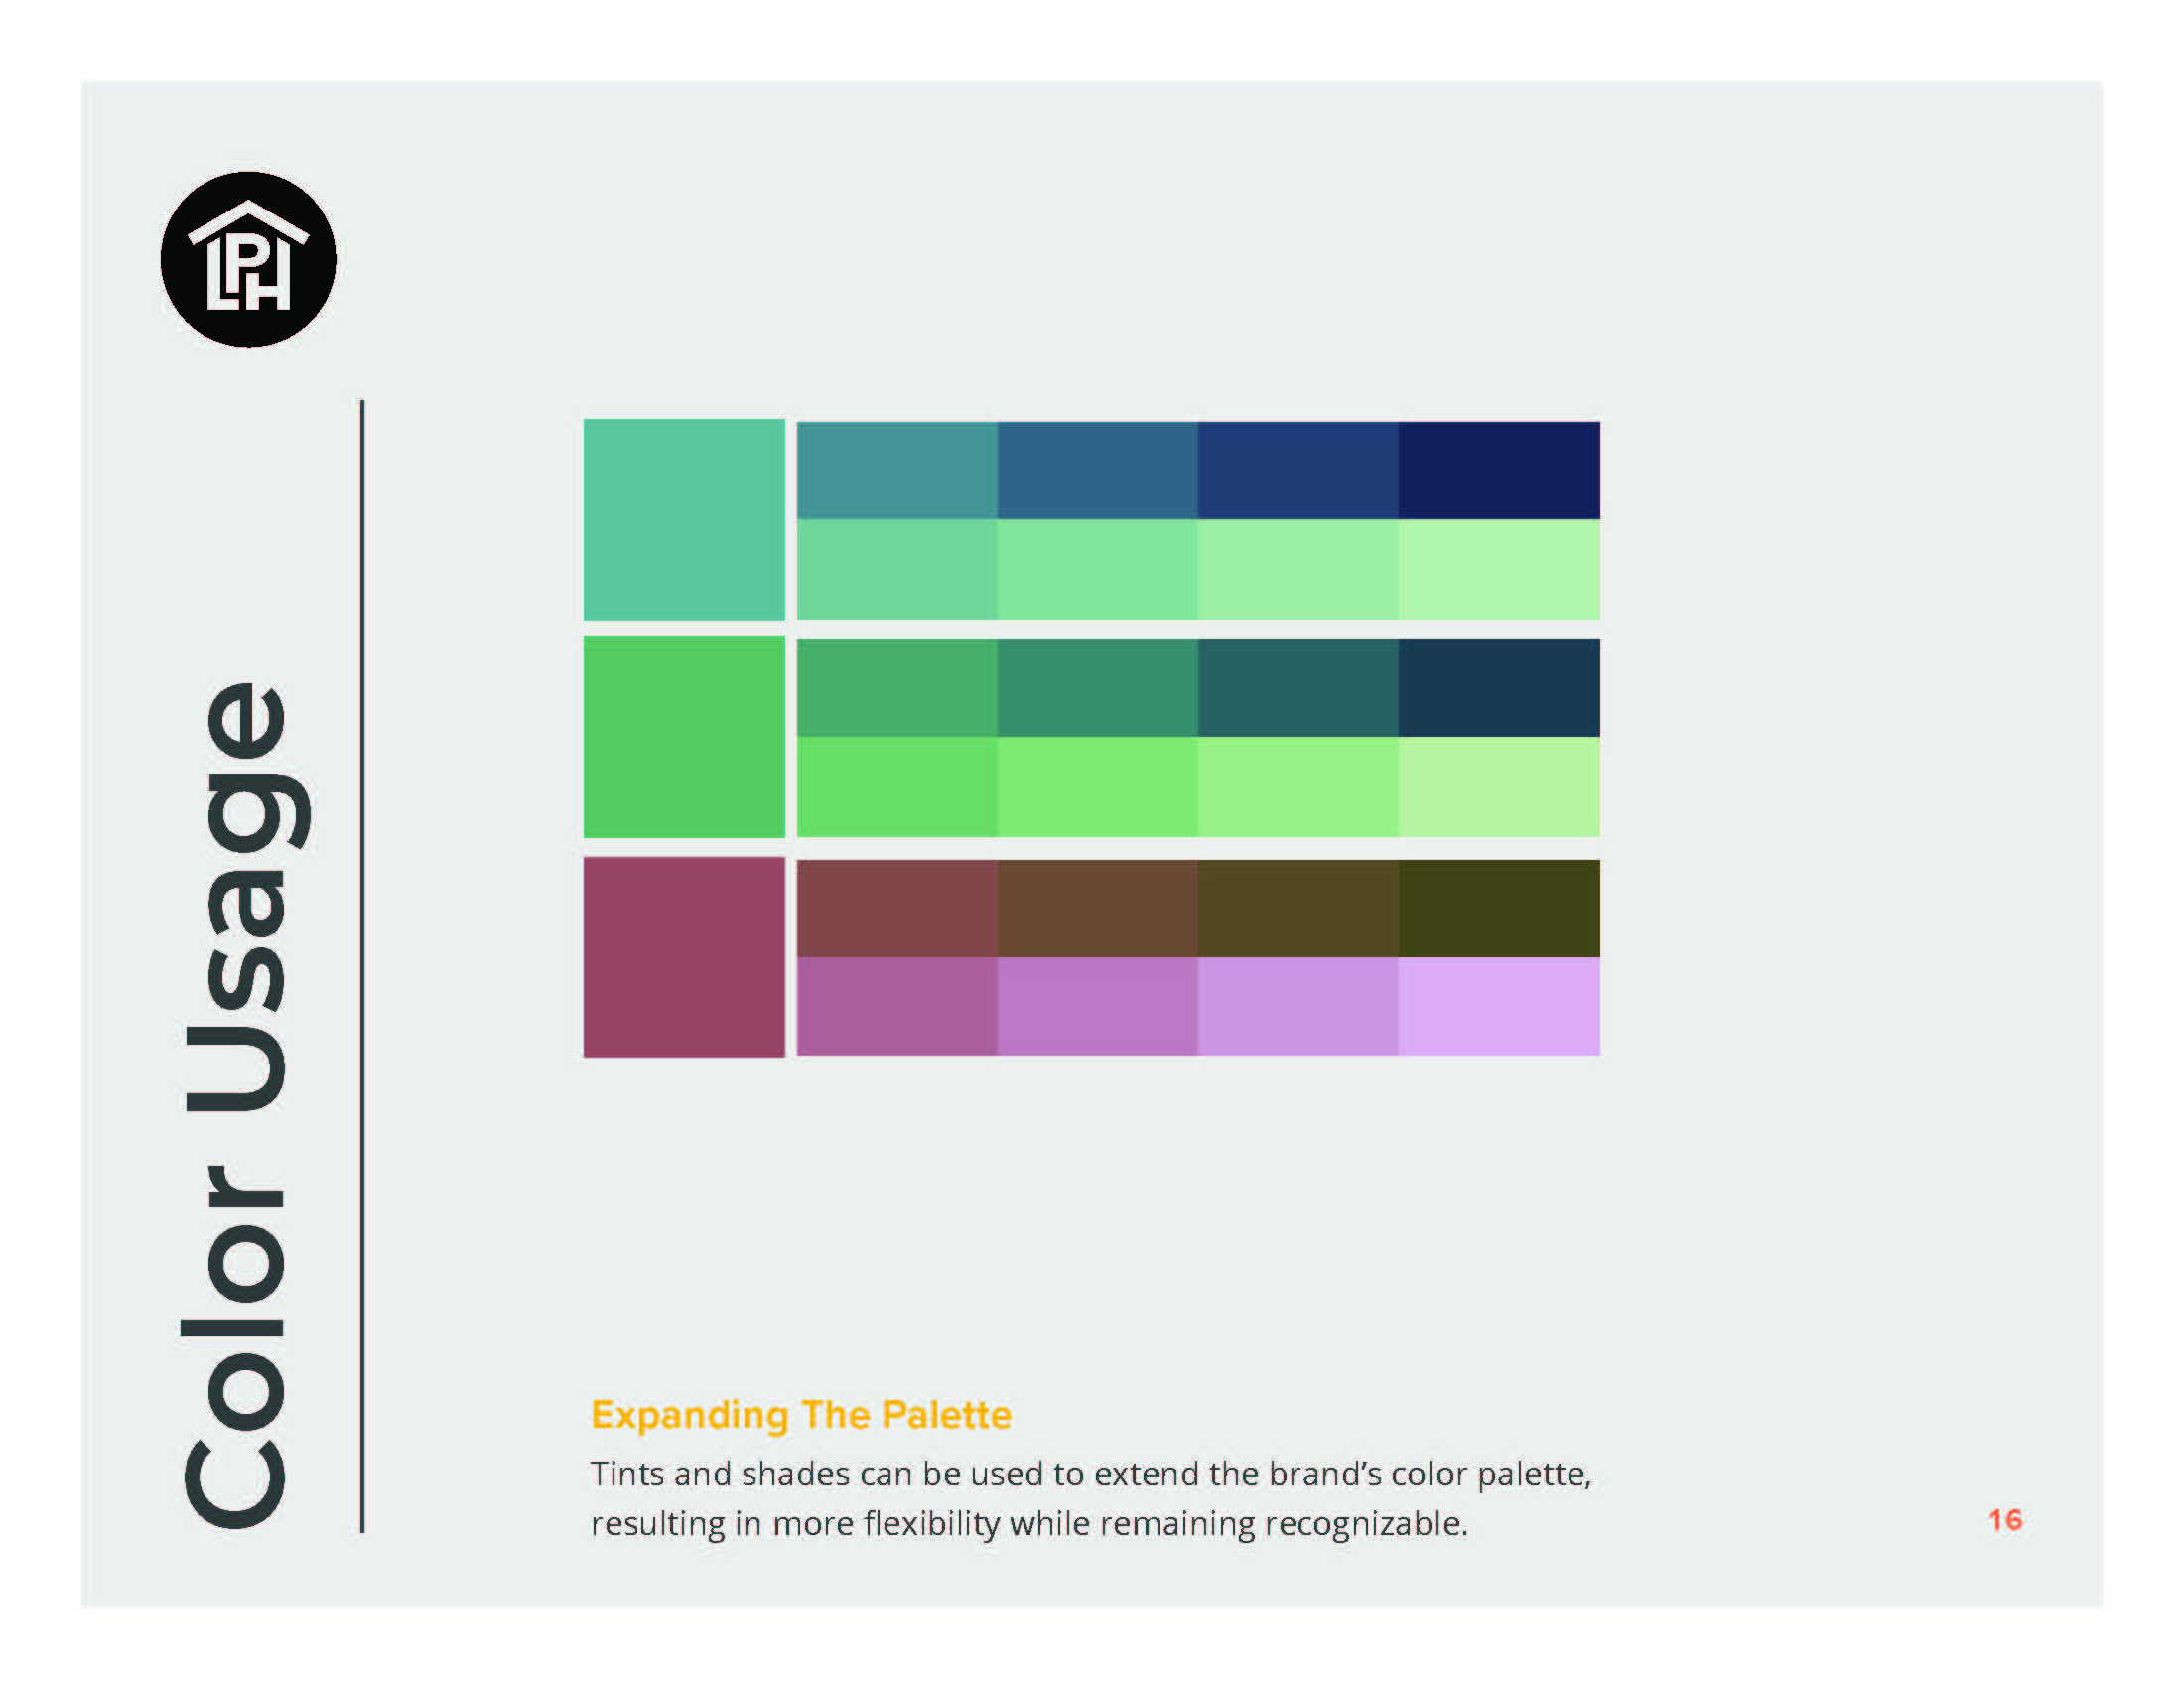 lph brand guidelines color usage